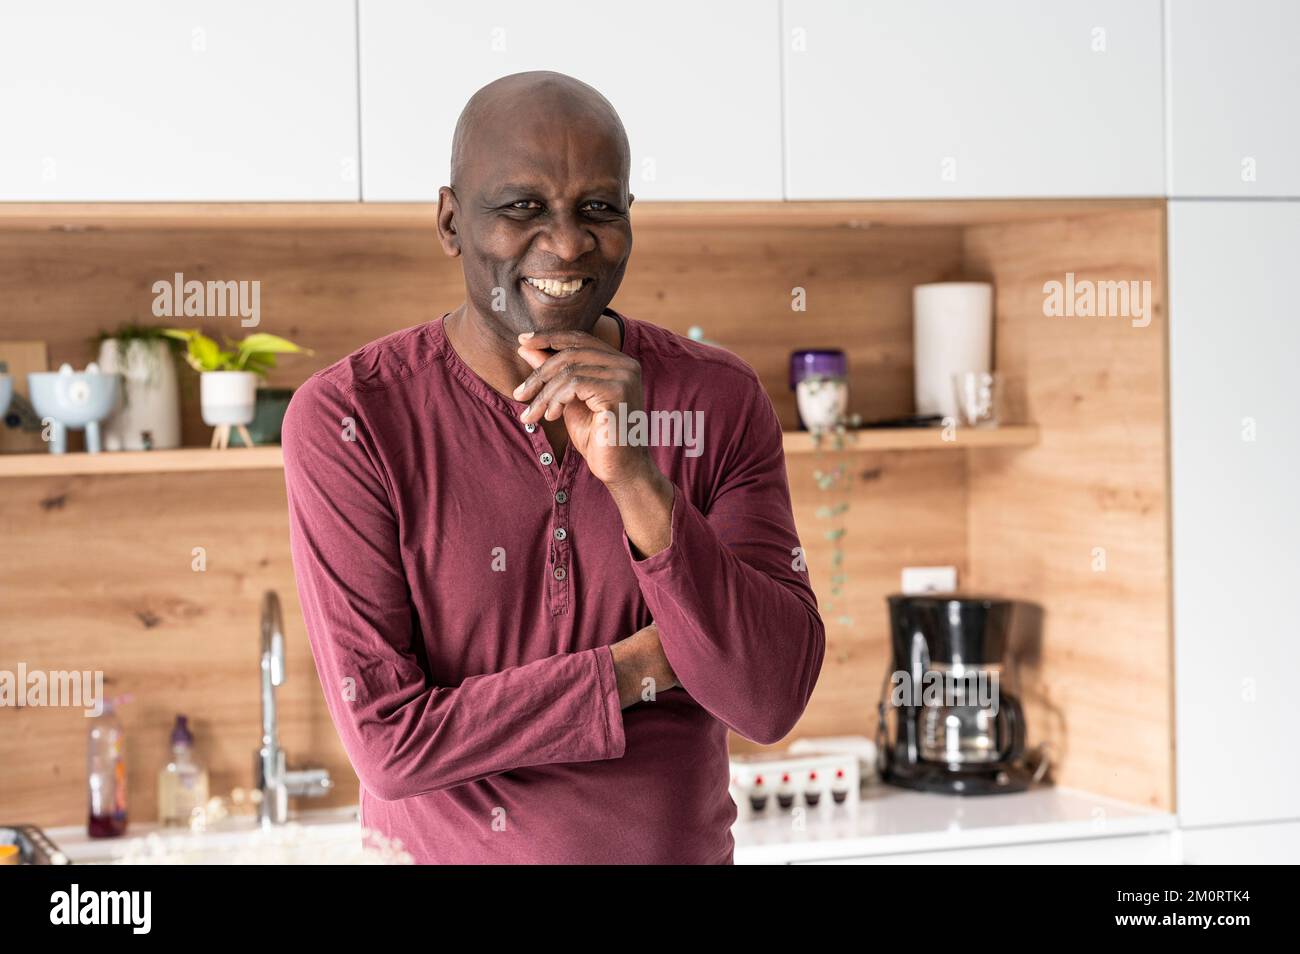 Portrait of middle age African-American man smiling at camera while standing in kitchen Stock Photo